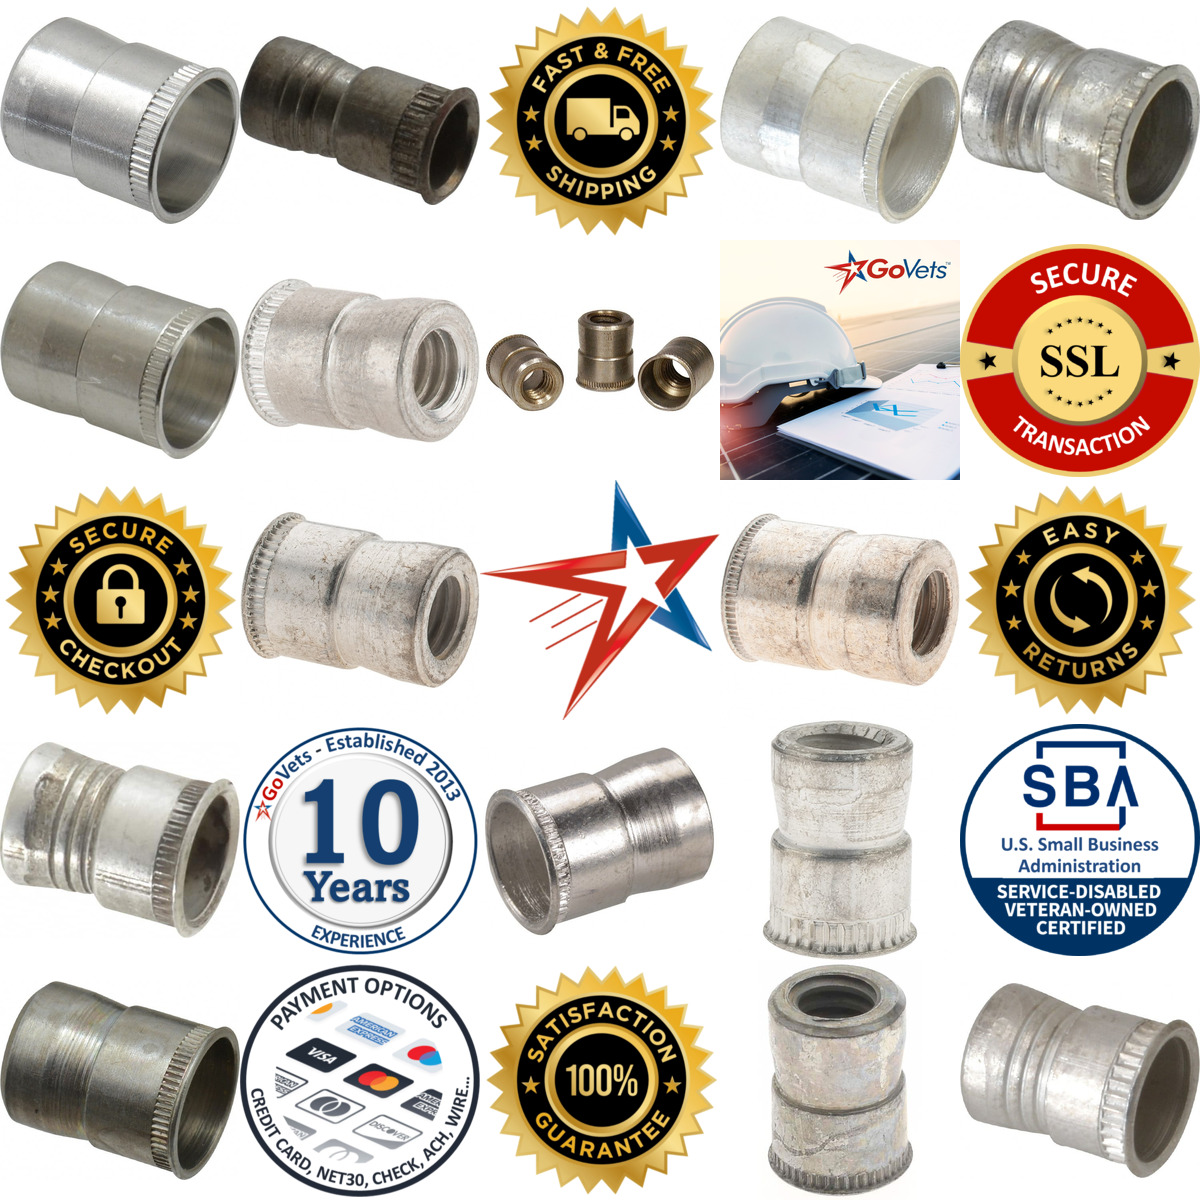 A selection of Knurled Rivet Nut Inserts products on GoVets